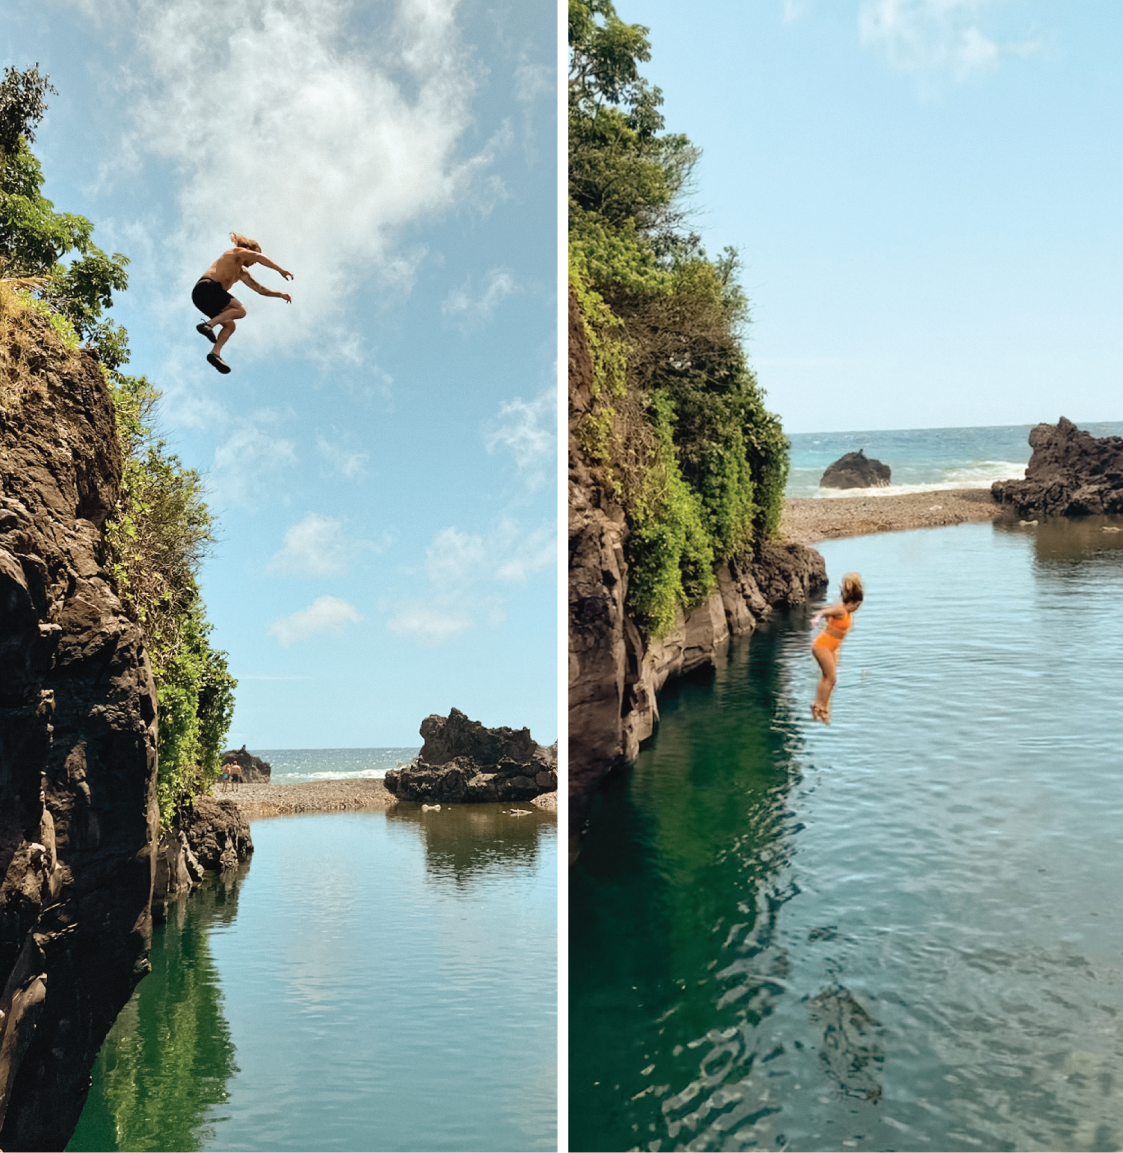 Jess + Adam, owners of Hello Adorn cliff jumping on the Road to Hana in Maui, Hawaii.